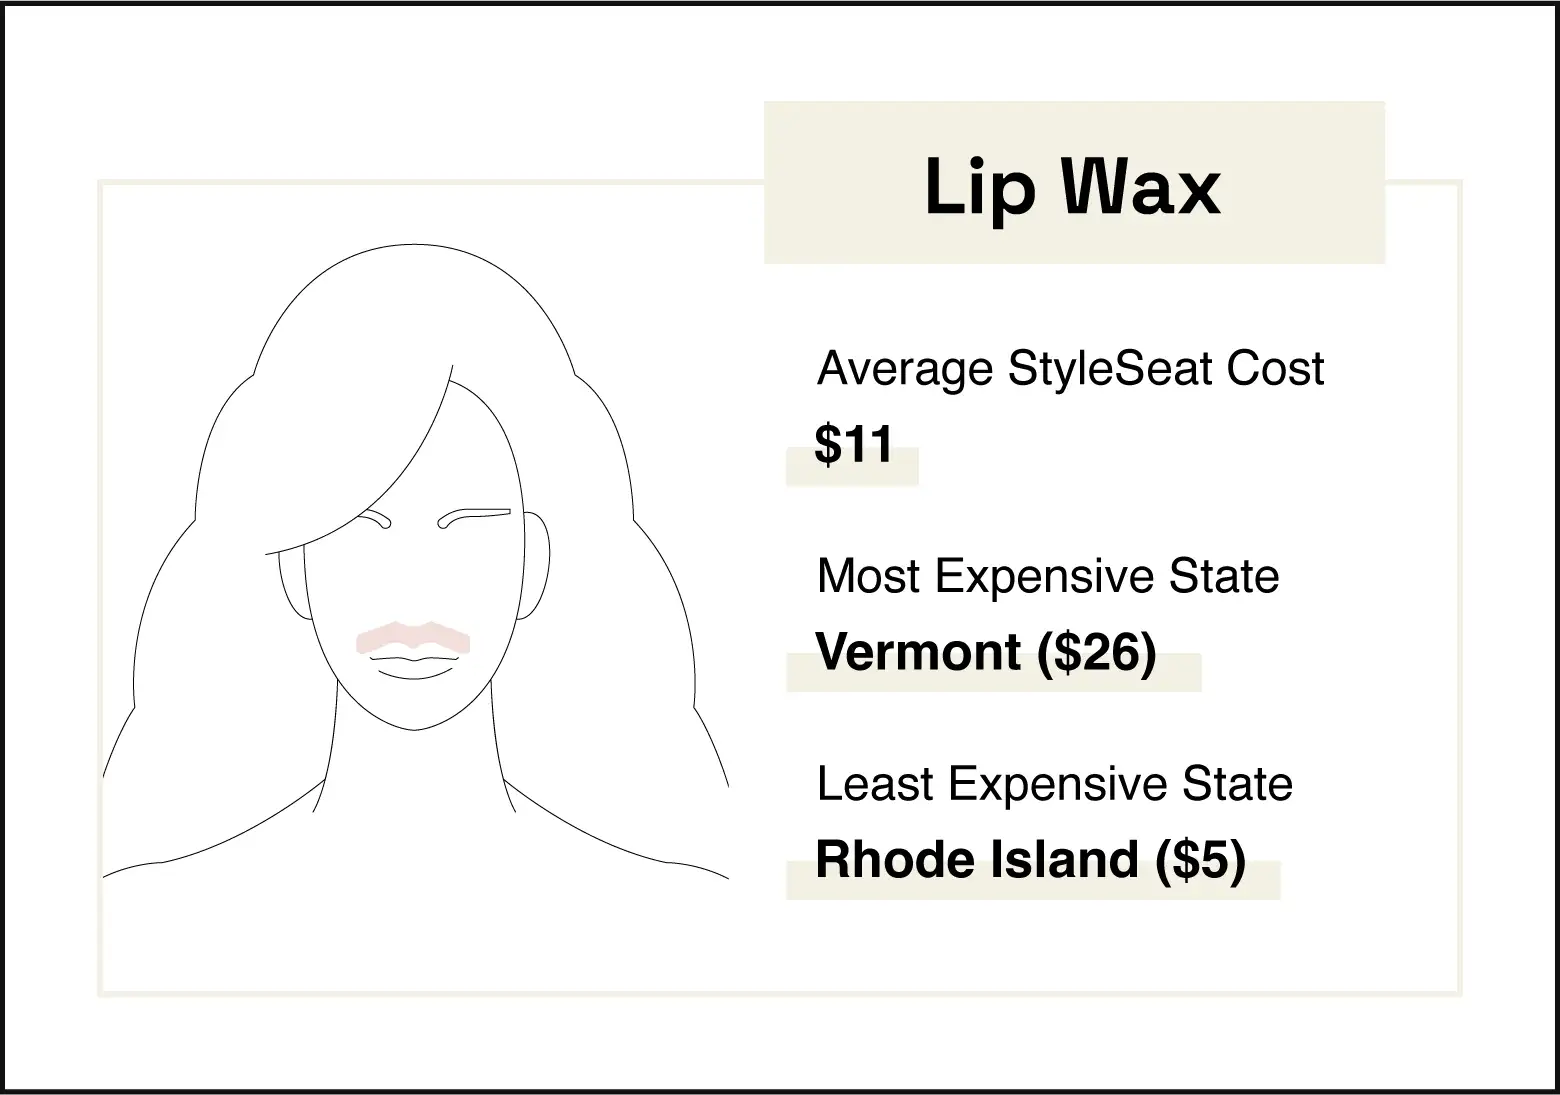 Image shows area where a lip wax occurs. The average lip wax on StyleSeat costs $11.